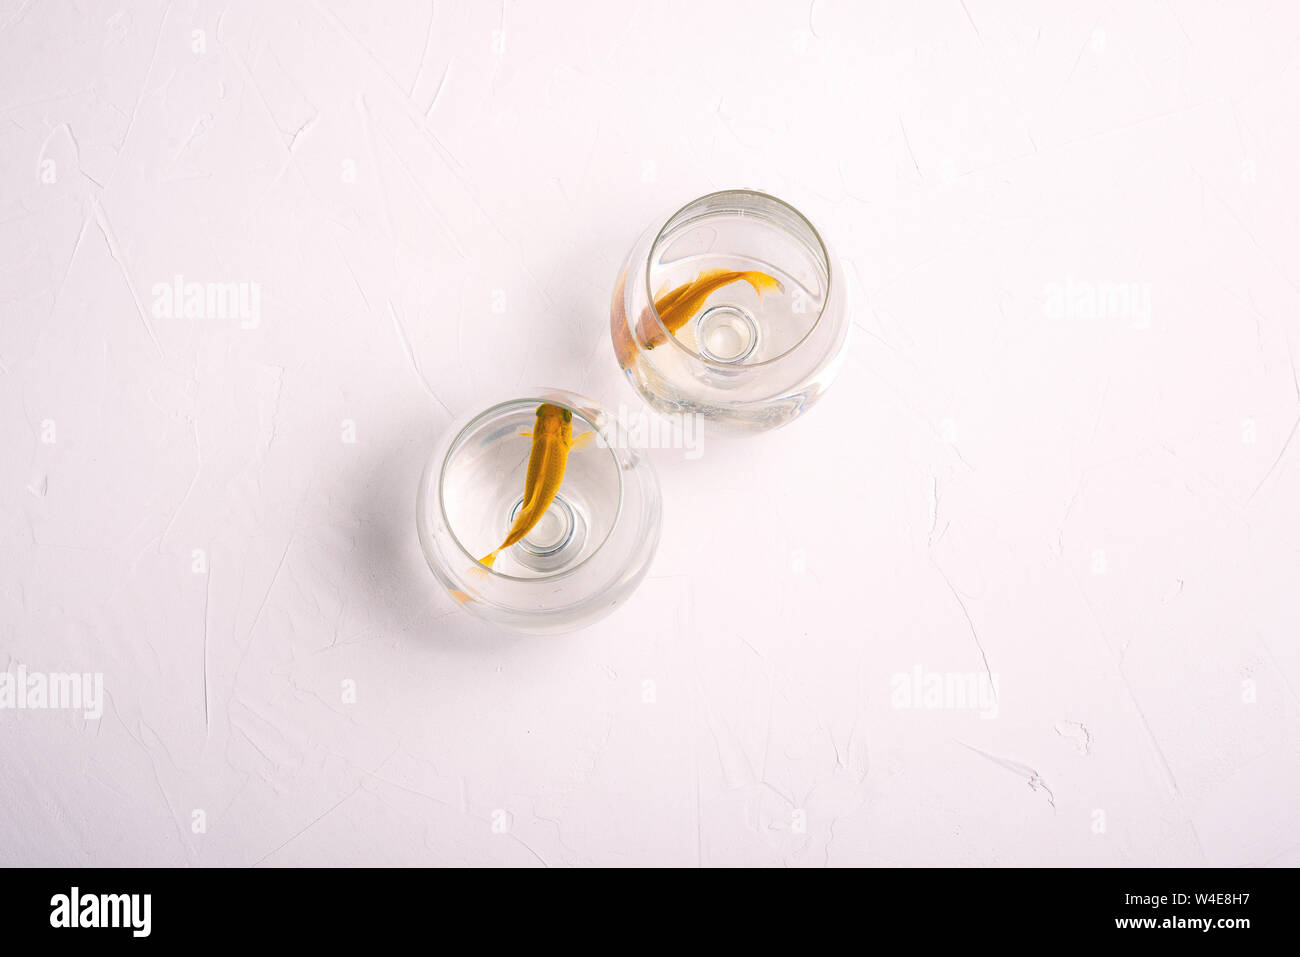 Two golden fish. Aquarium fish swim in glasses for wine. Pets. The concept of relationships, divorce, distance. Buying and selling fish Stock Photo